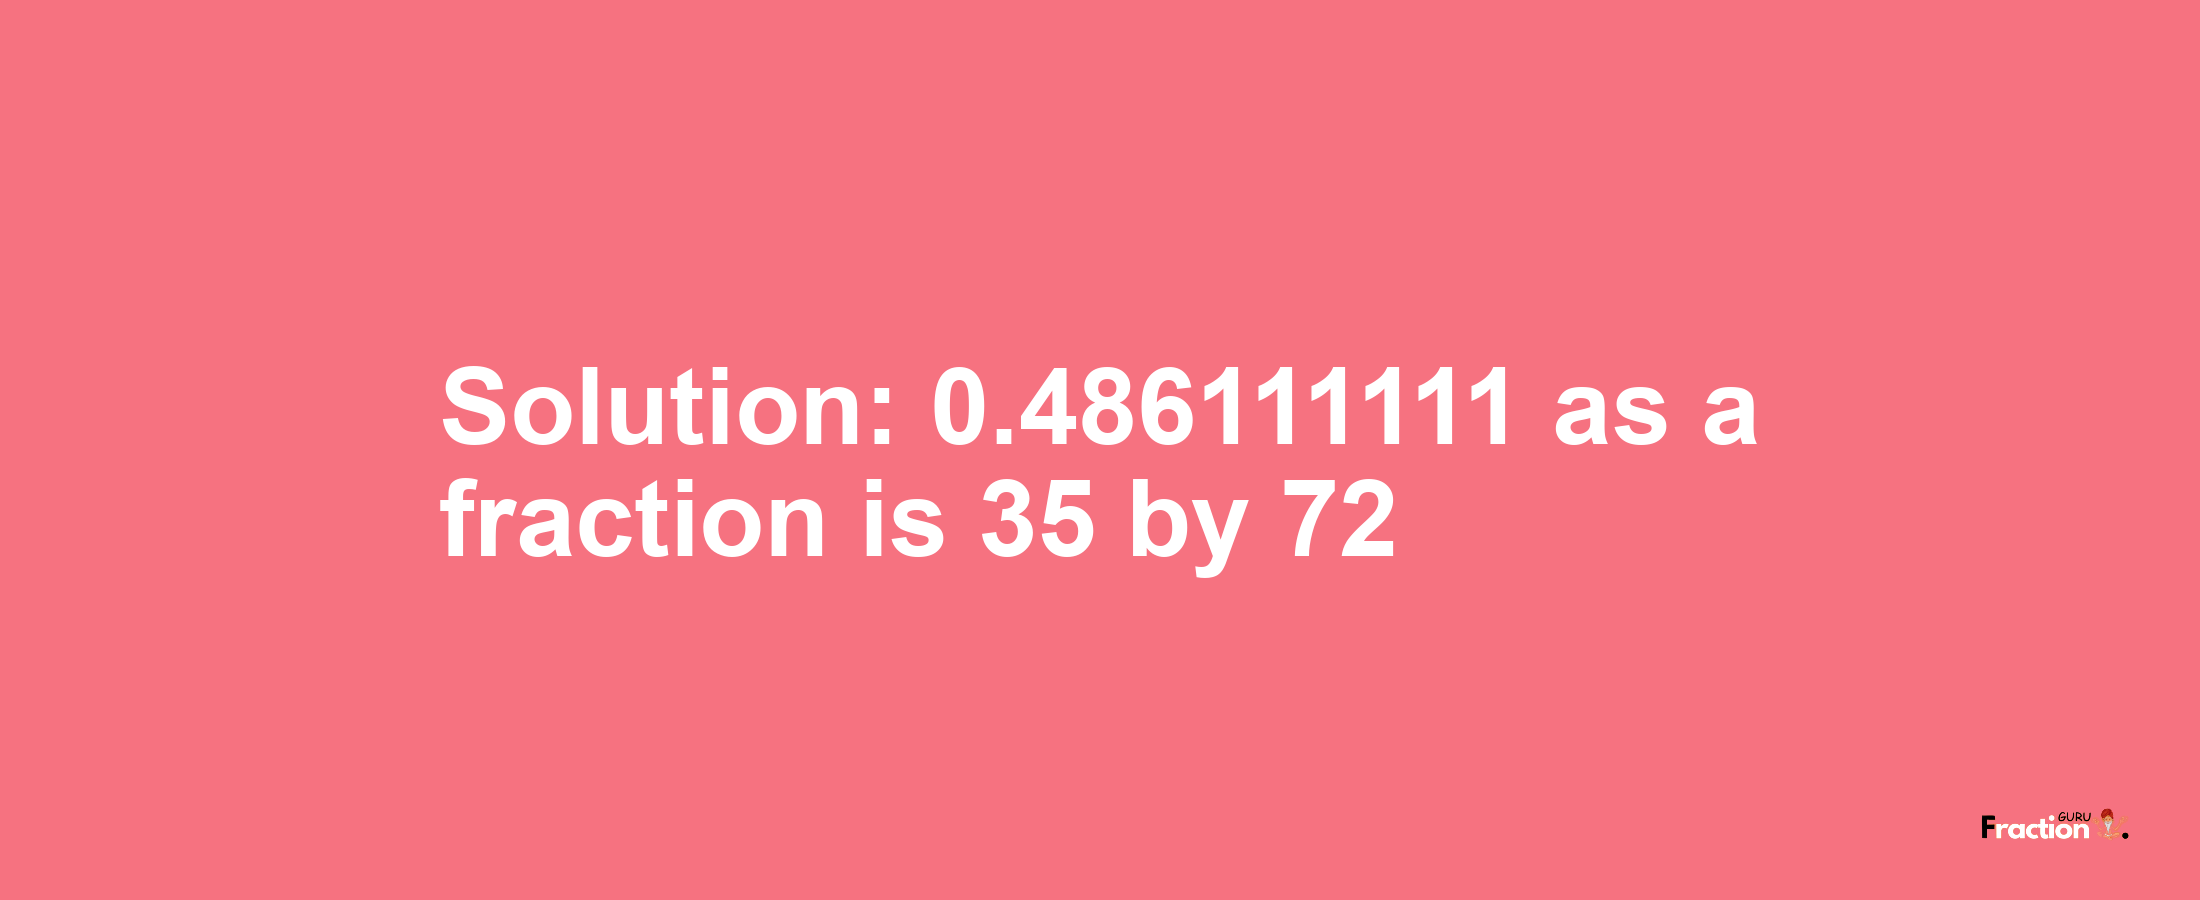 Solution:0.486111111 as a fraction is 35/72